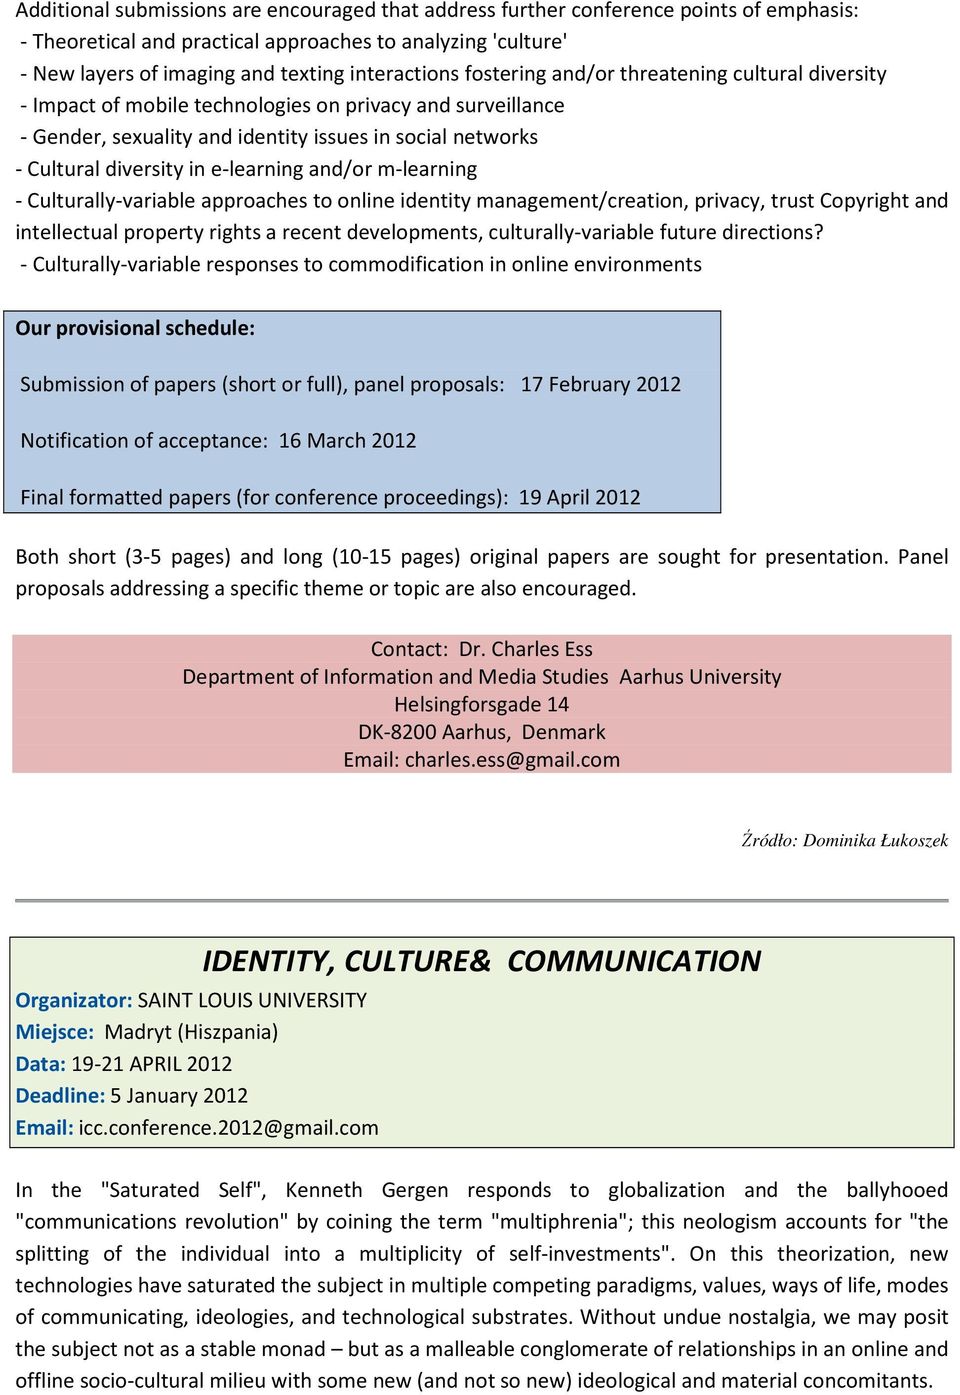 diversity in e-learning and/or m-learning - Culturally-variable approaches to online identity management/creation, privacy, trust Copyright and intellectual property rights a recent developments,